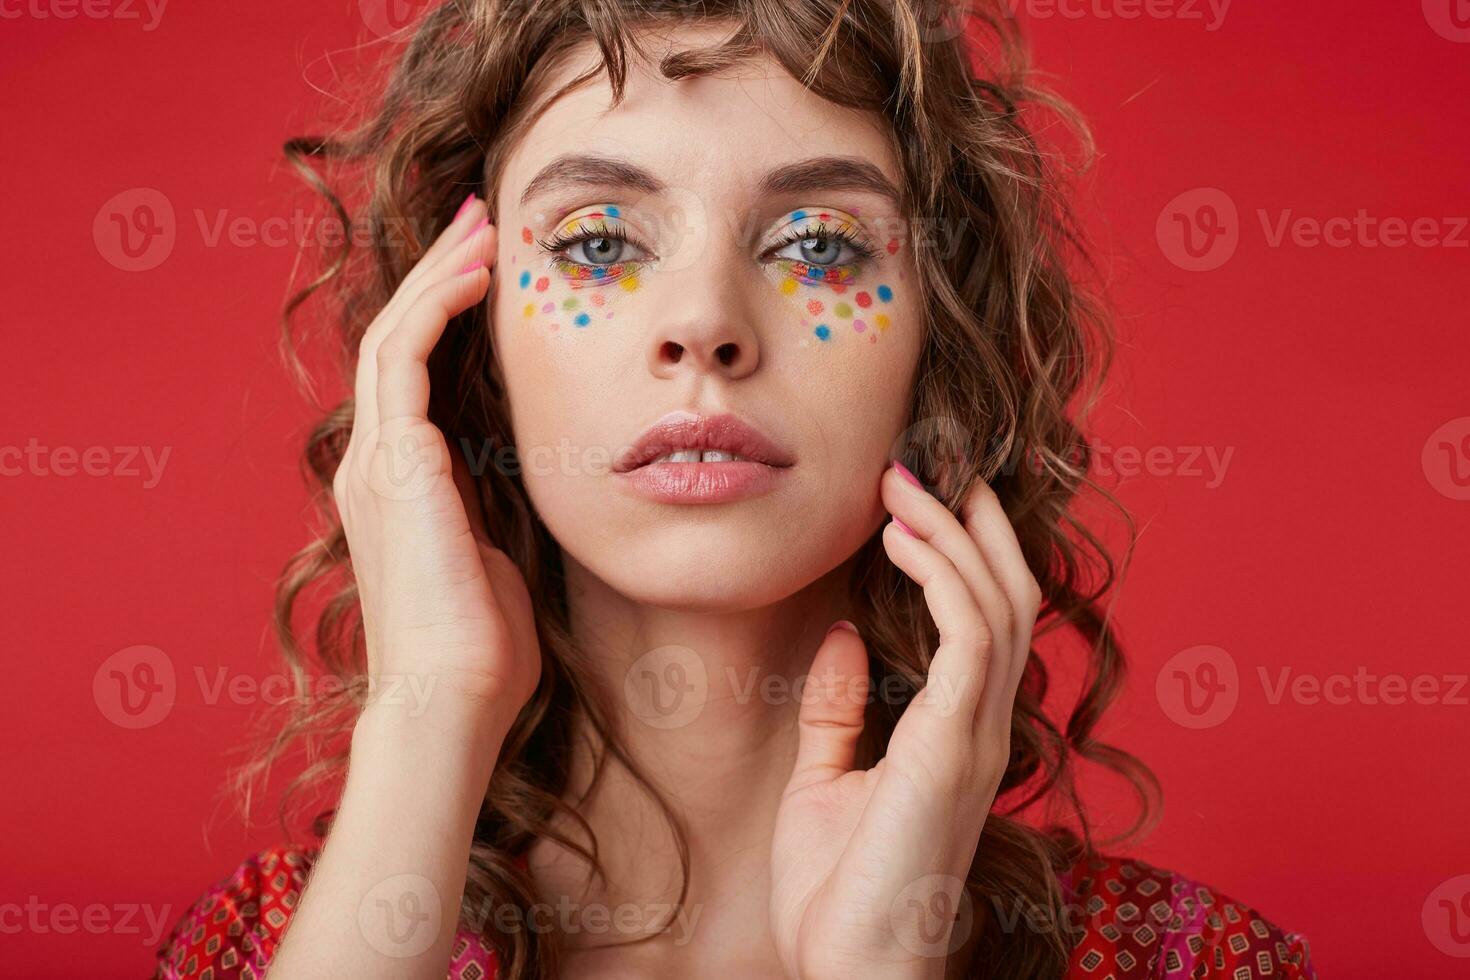 Beautiful blue-eyed curly woman with multicolored dots on her face wearing motley patterned top, keeping hands gently near her face, isolated over red background photo